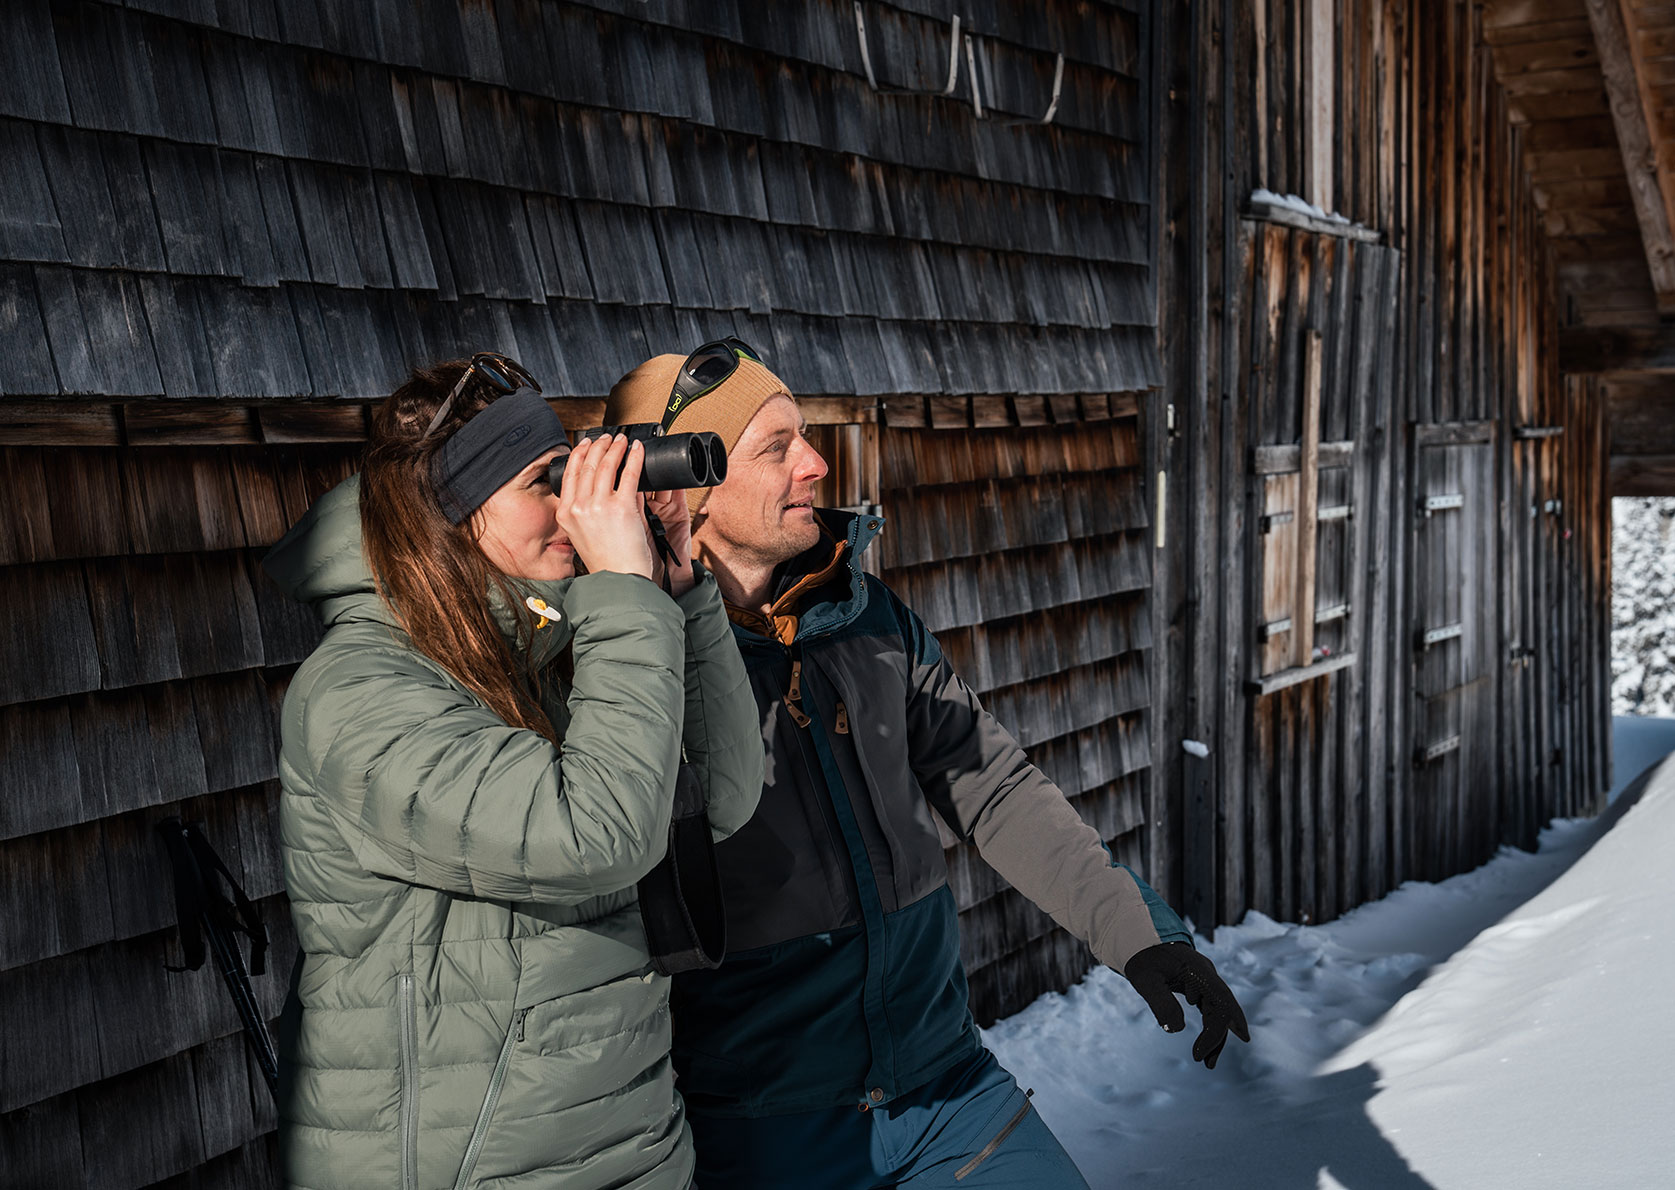 Lukas and Franziska use binoculars to observe chamois in front of a hut